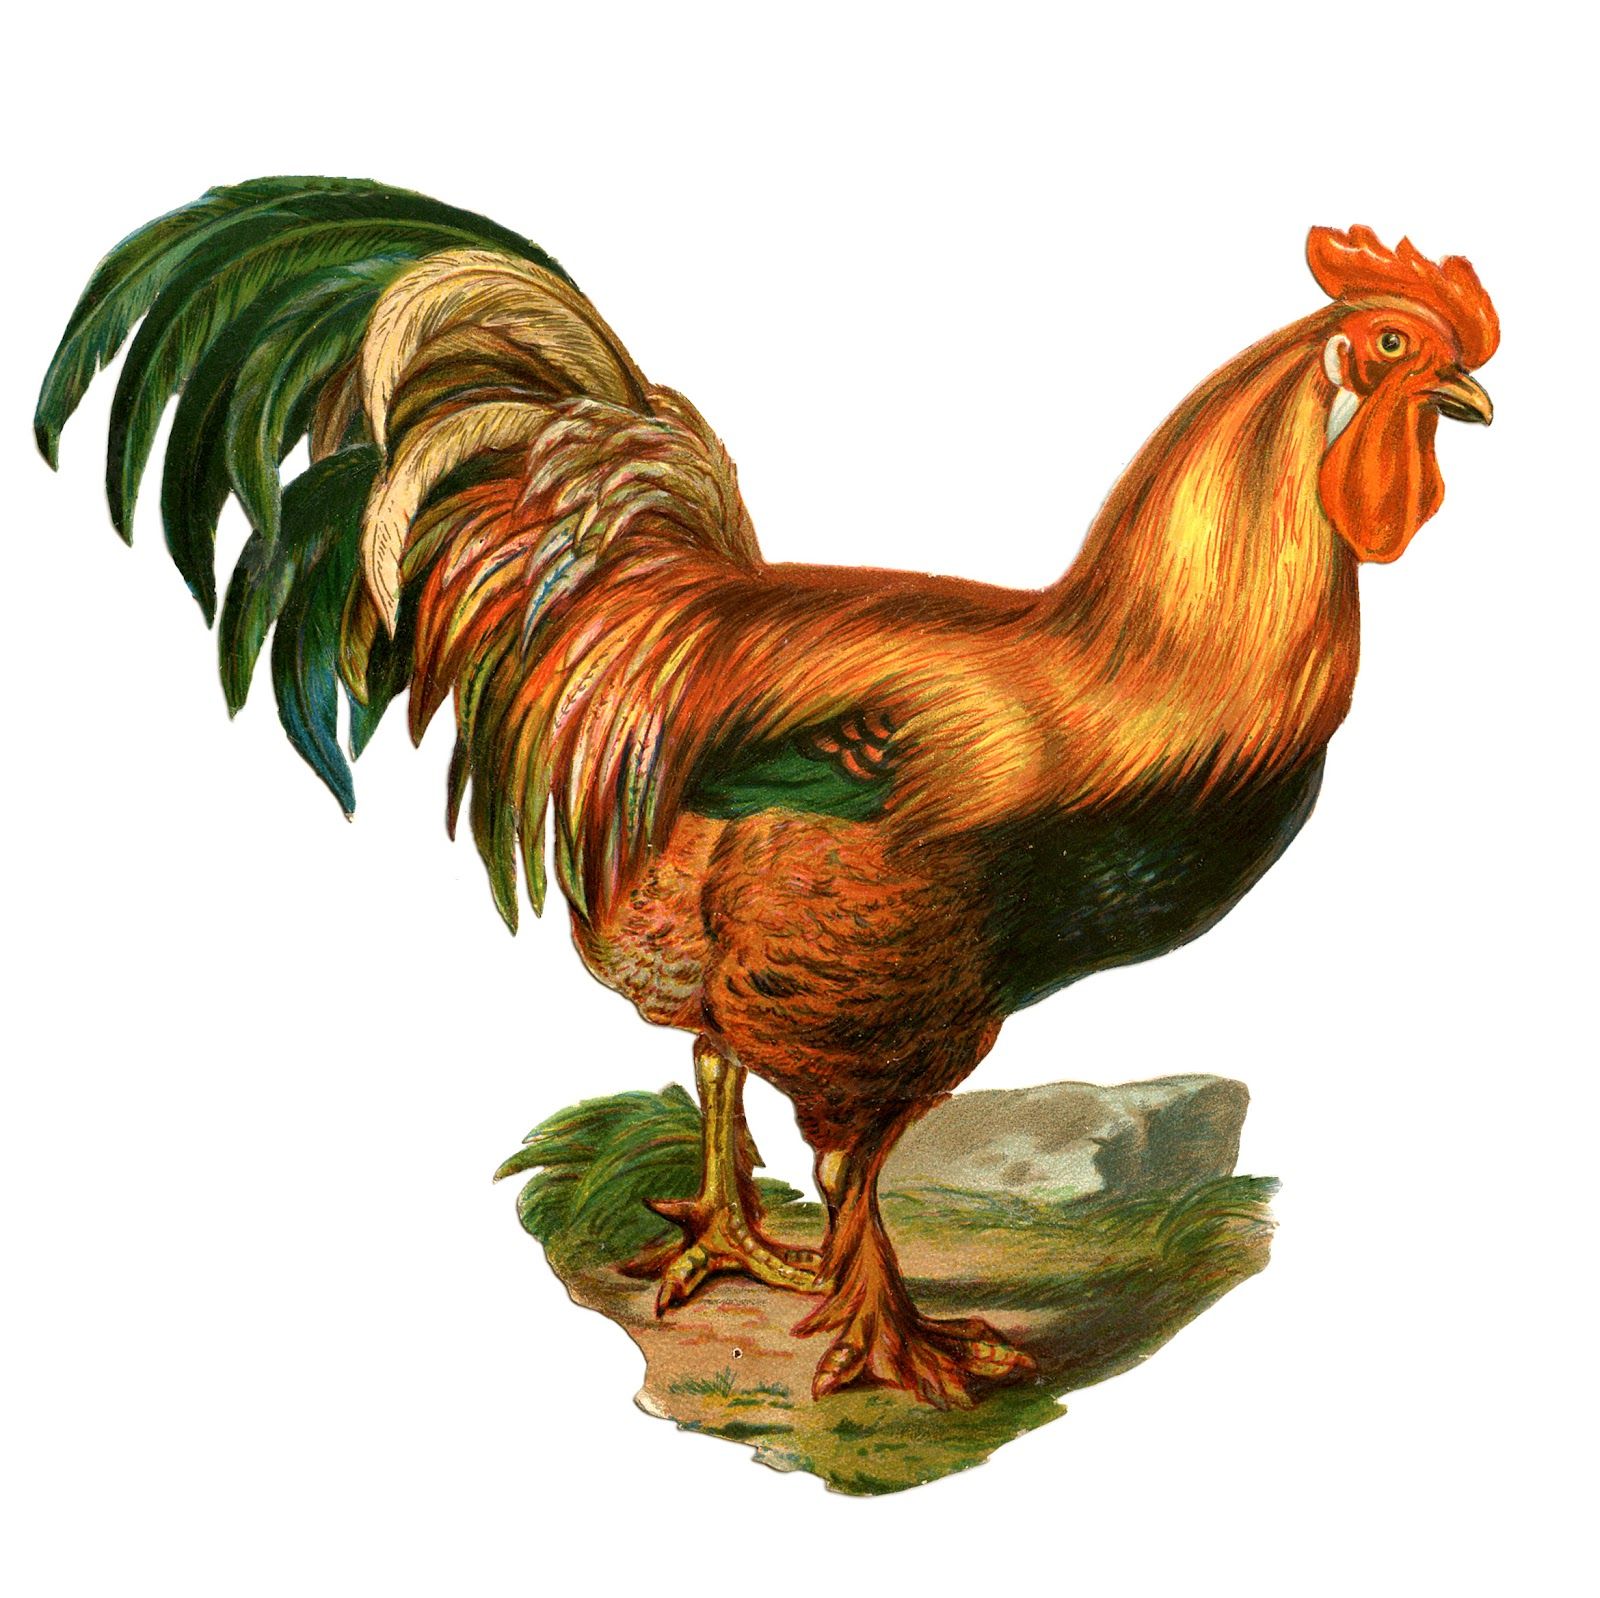 Farm Clip Art - Colorful Rooster | Graphics fairy, Clip art and Graphics